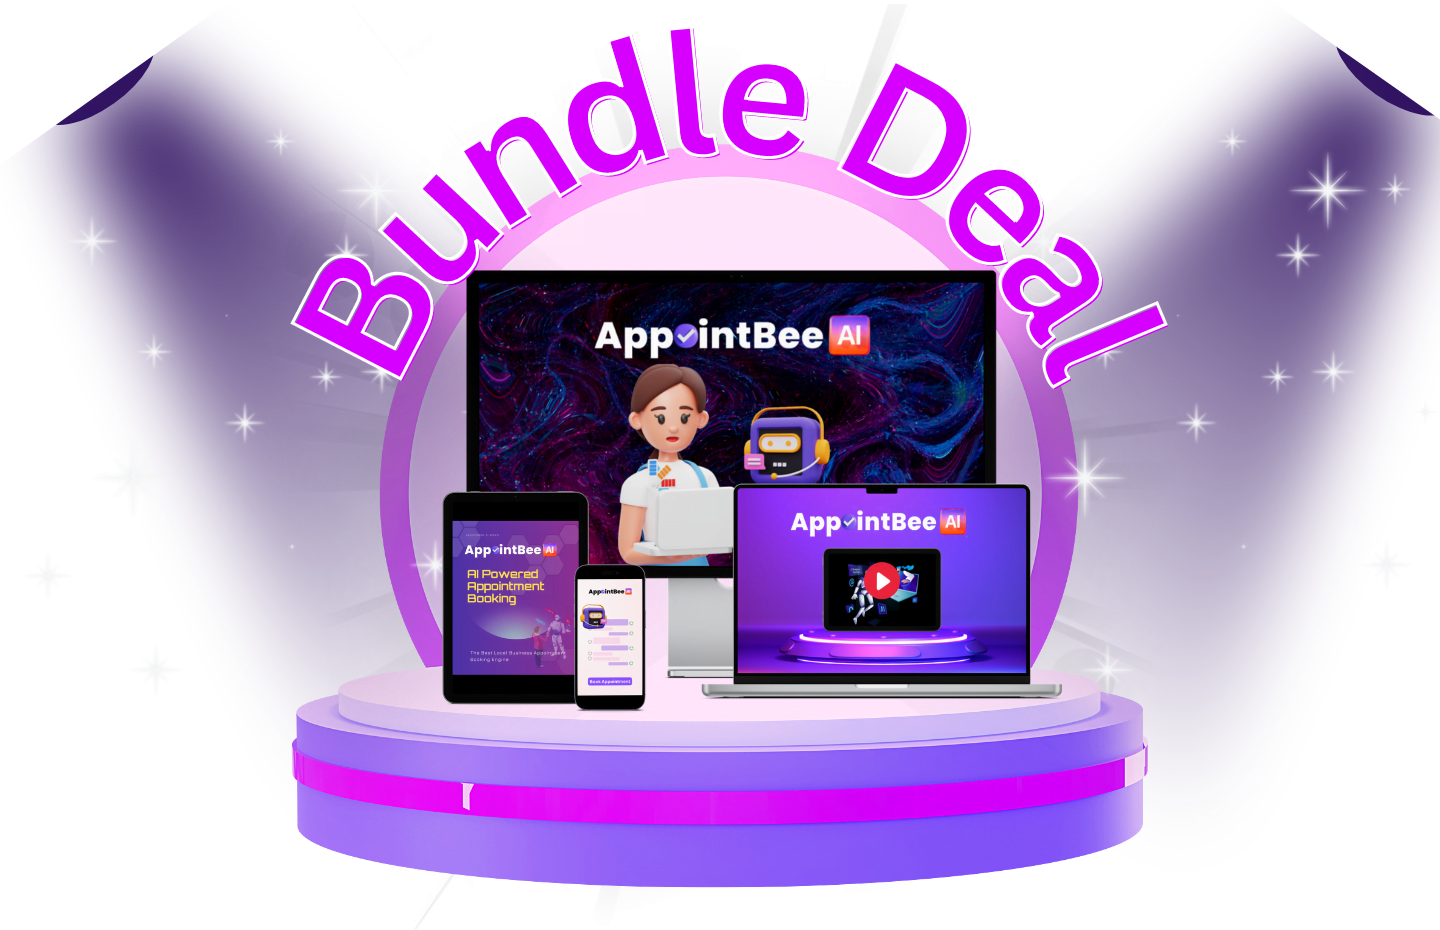 appoint-bee-deal-bundle-launch